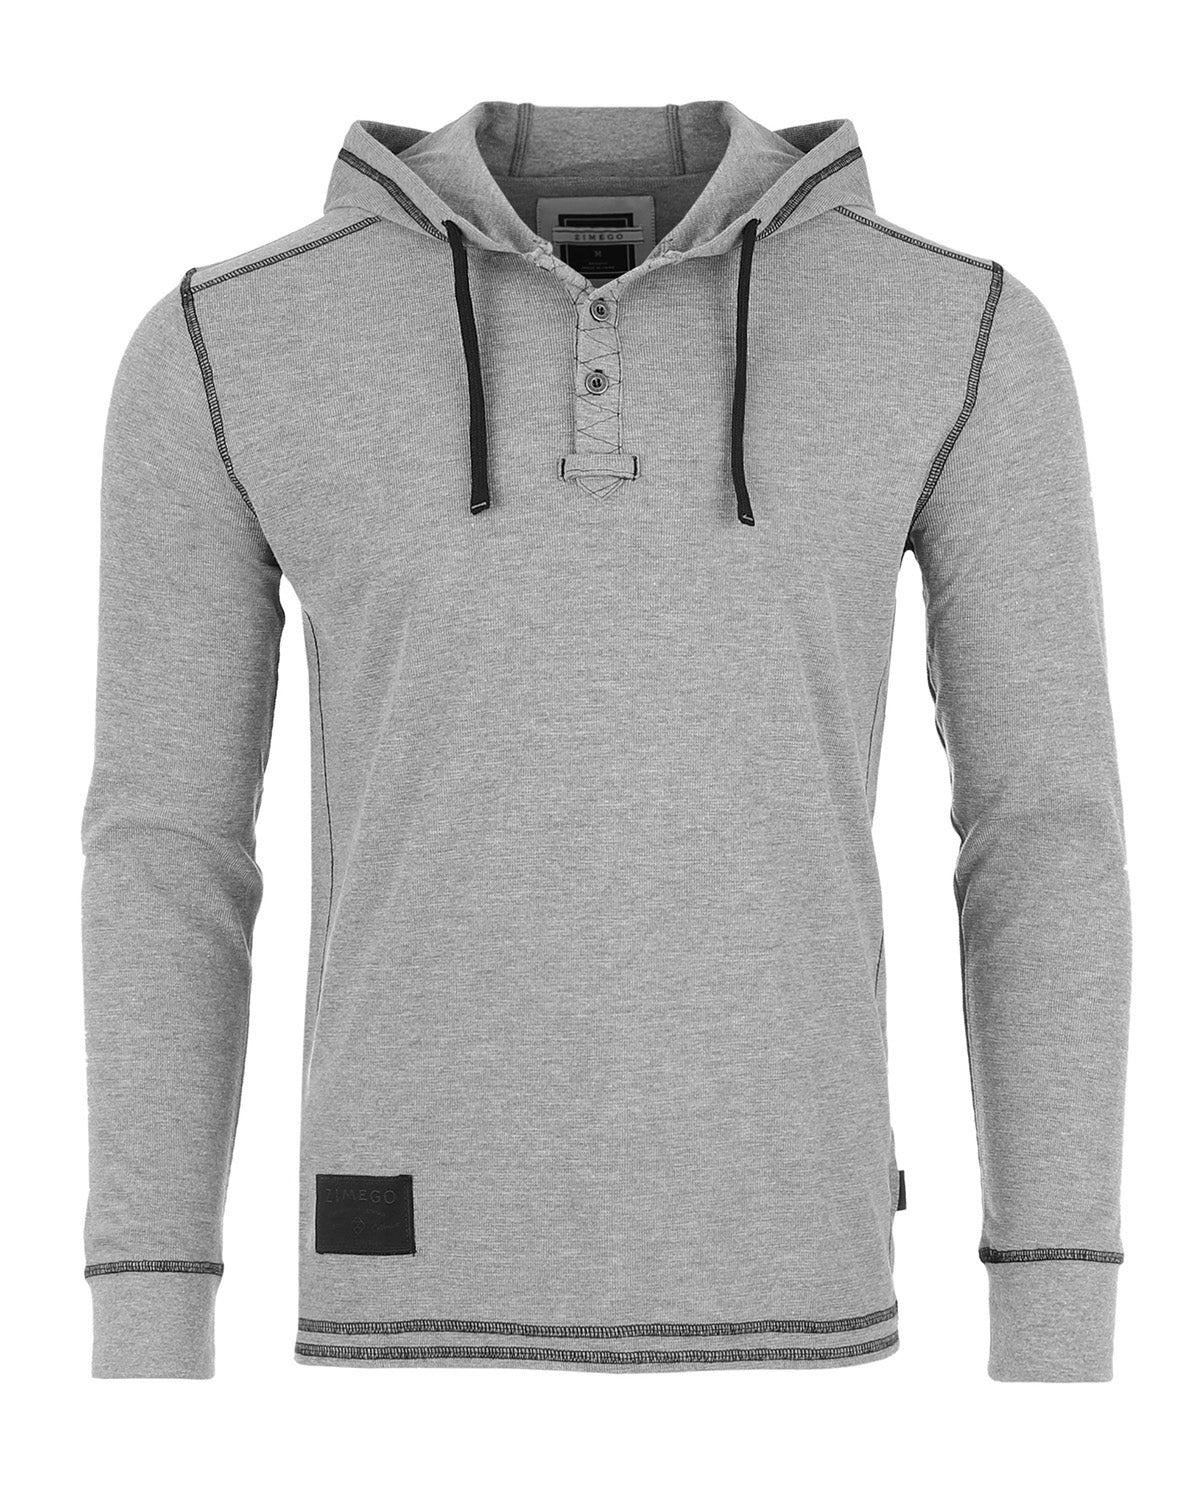 Men's Thermal Long Sleeve Lightweight Fashion Hooded Henley